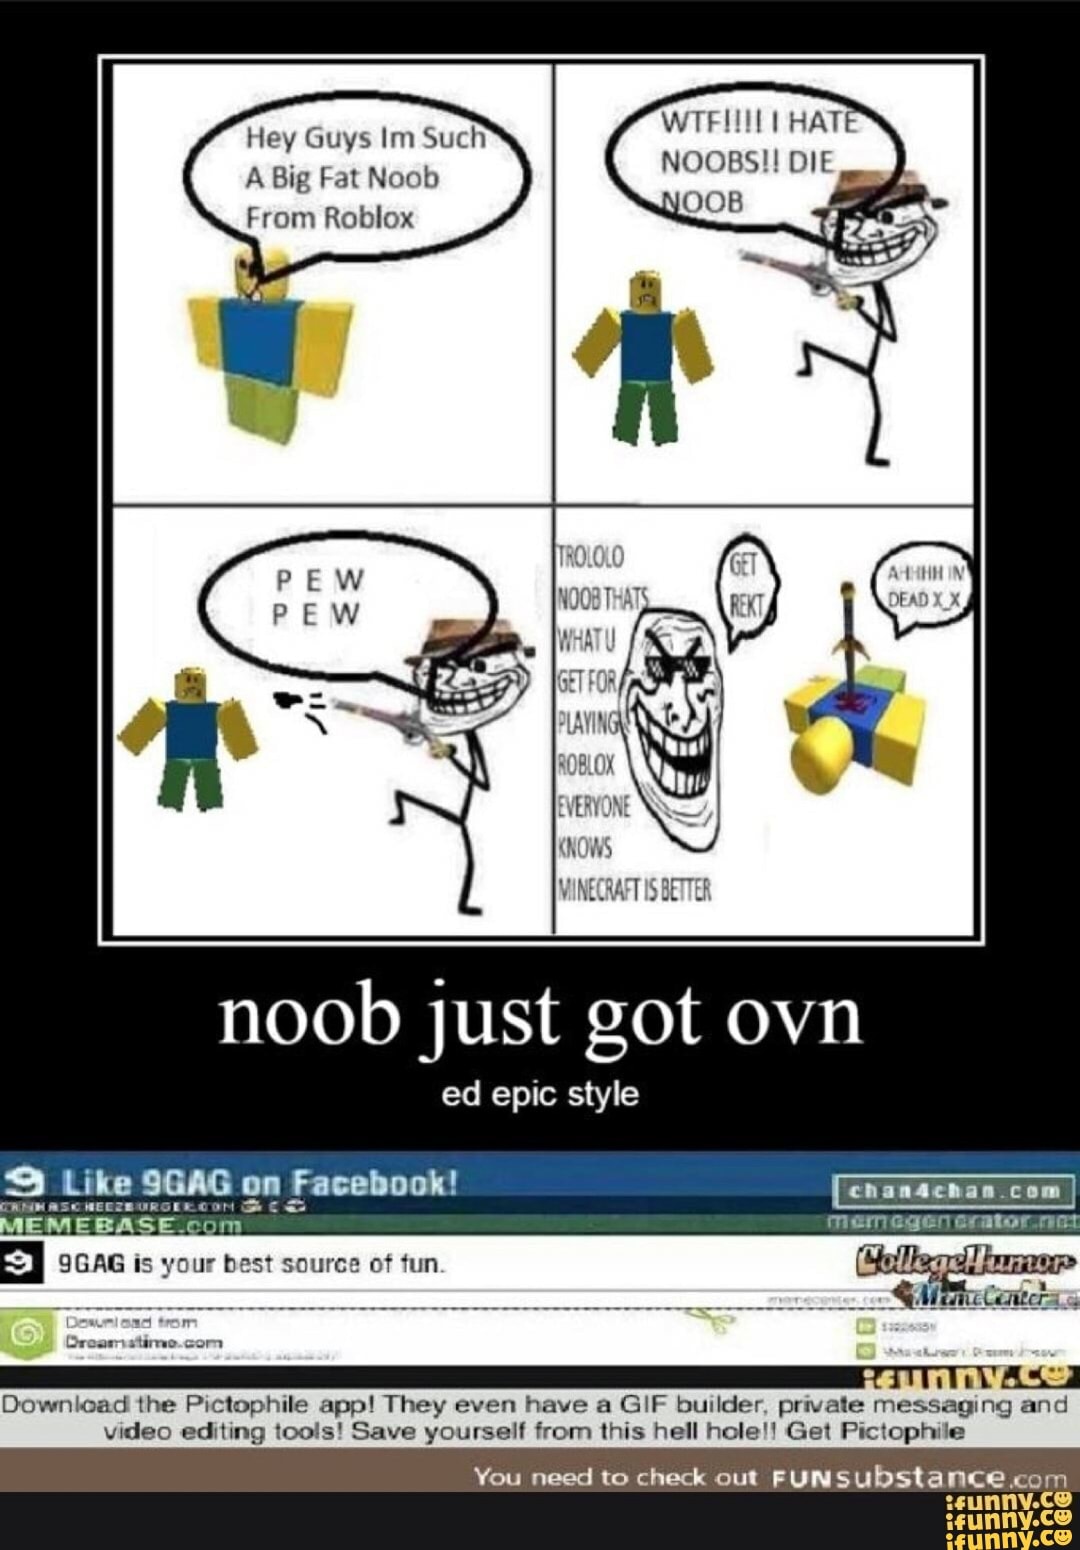 Hey Guys Im Such A Big Fat Noob From Roblox Noob Just Got Ovn I N Mi Download The Plclophile App They Even Have A Gif Bwlder Pnvale Messaging And Wdeo Editing - big roblox noob